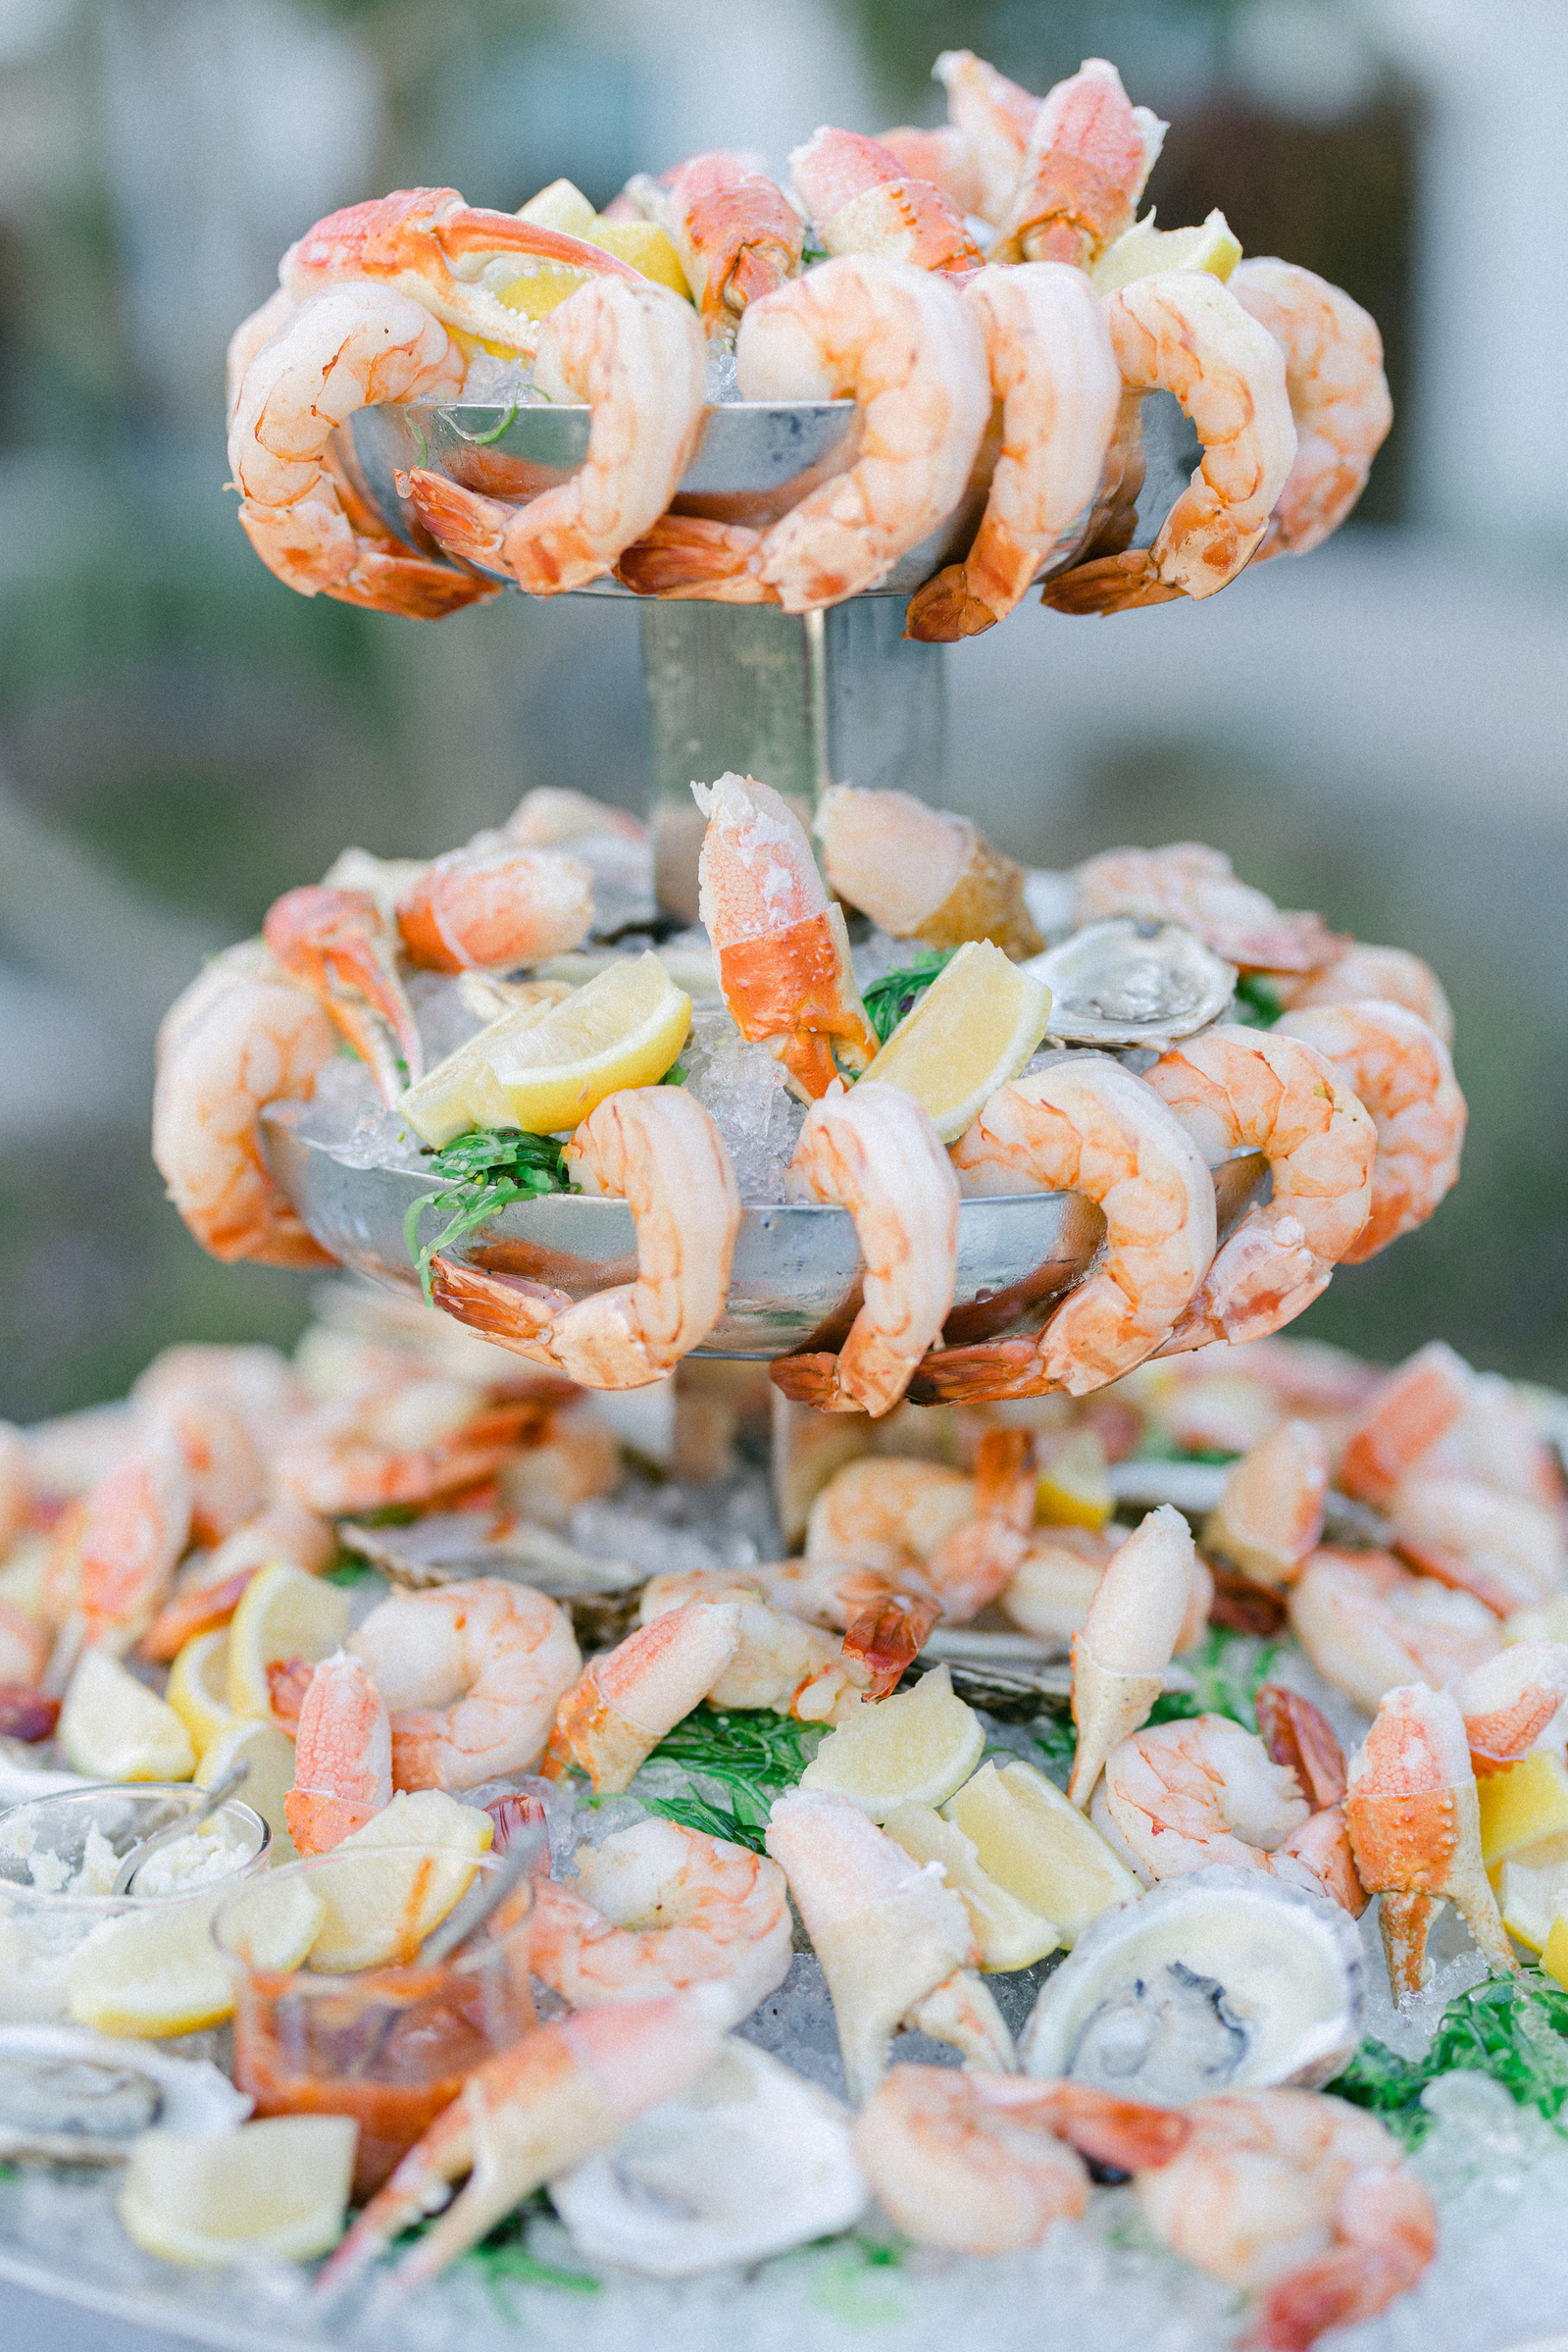 Shrimp displayed as an appetizer for a beautiful wedding